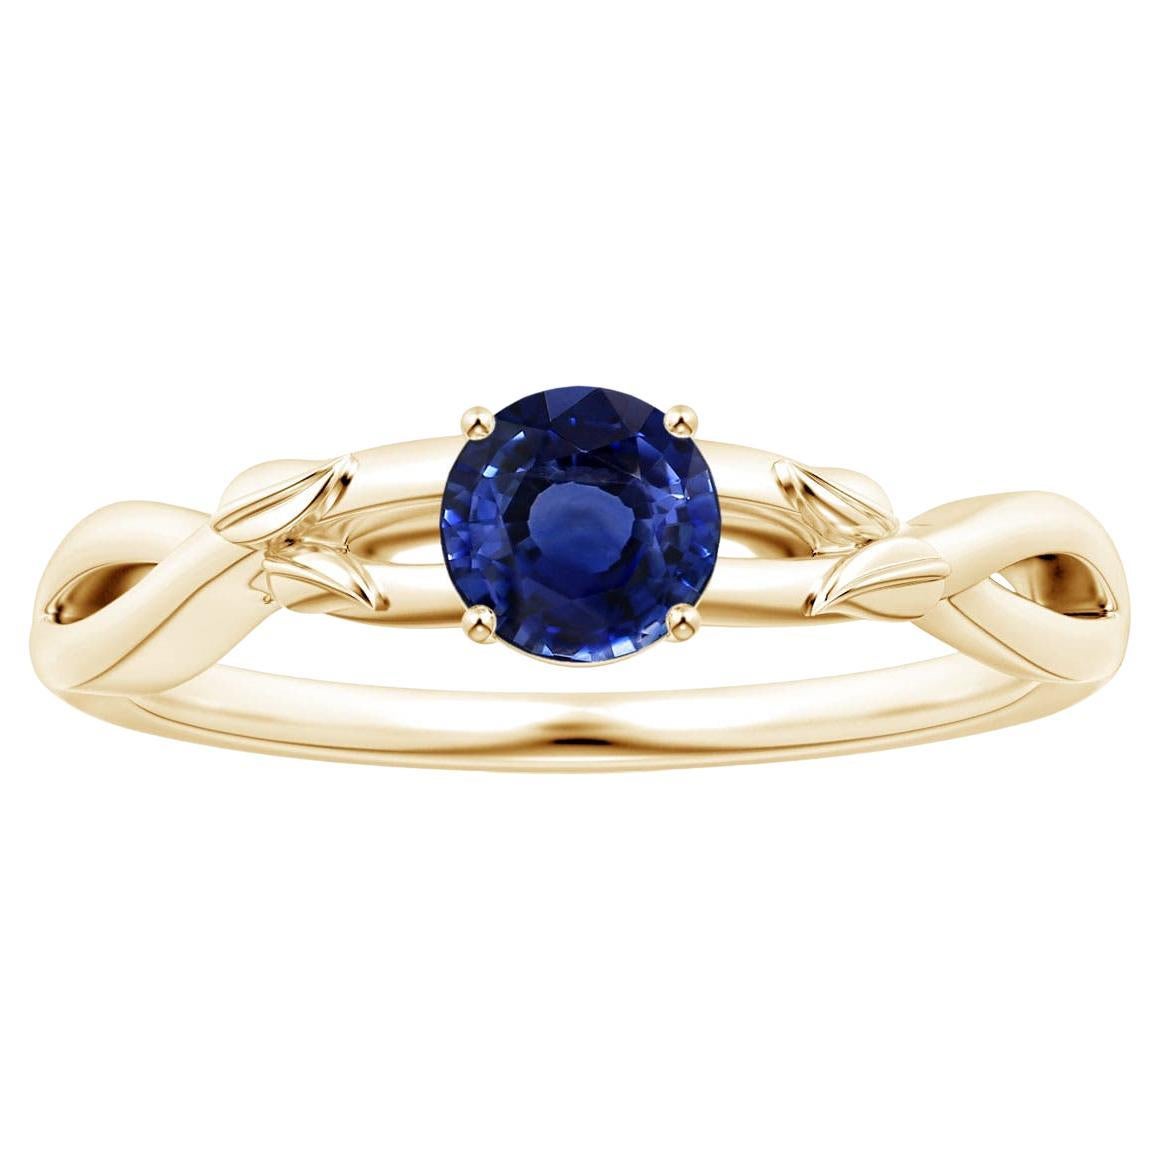 For Sale:  ANGARA GIA Certified Natural Blue Sapphire Solitaire Ring in 18K Yellow Gold